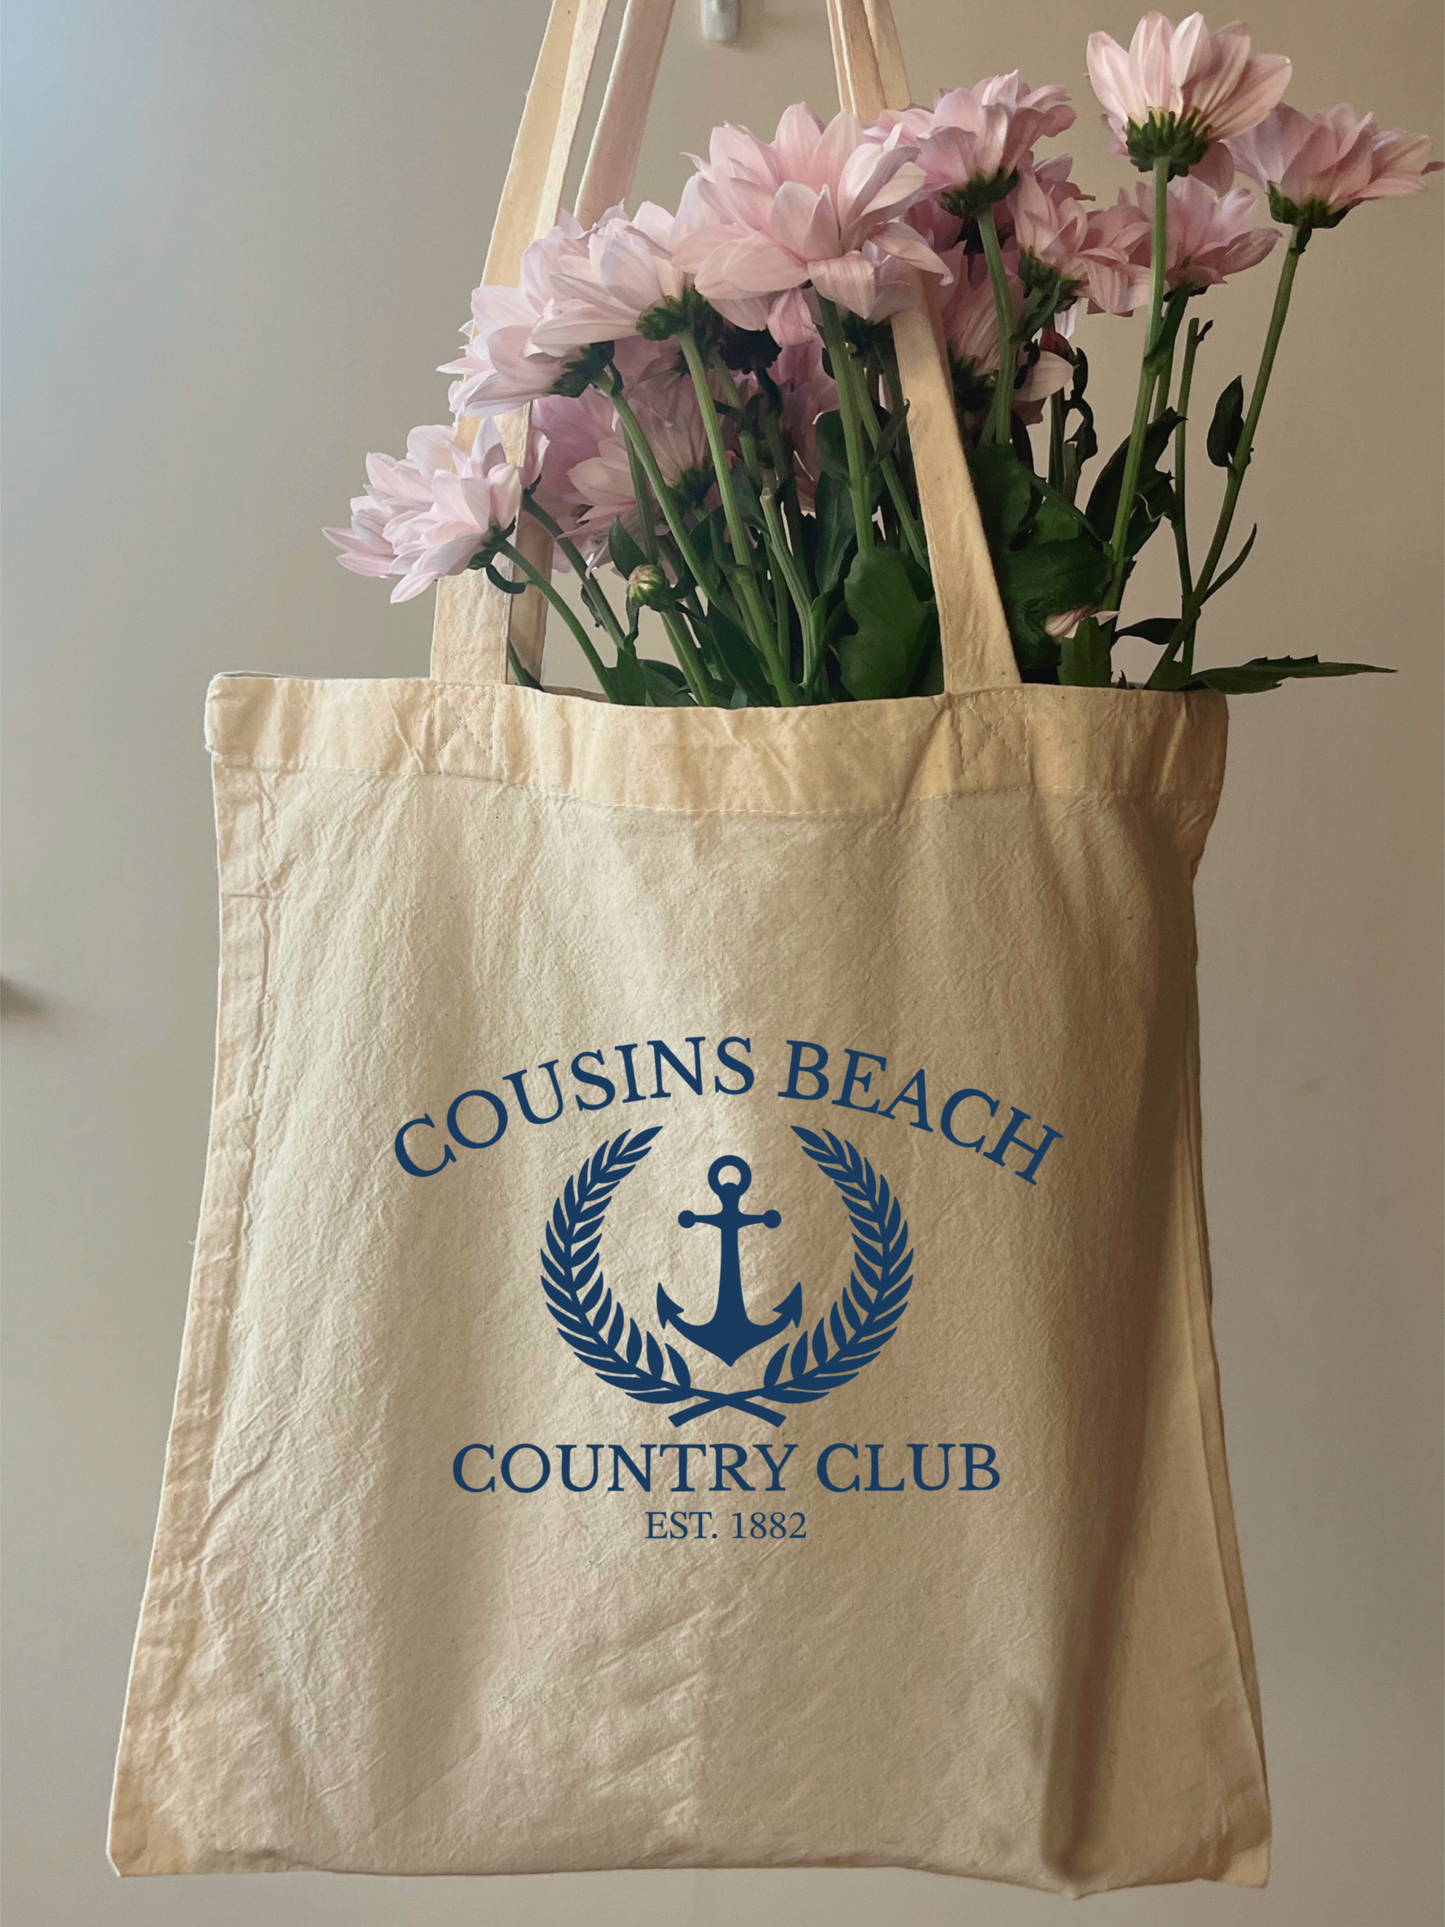 Cousins Beach Country Club | The Summer I Turned Pretty